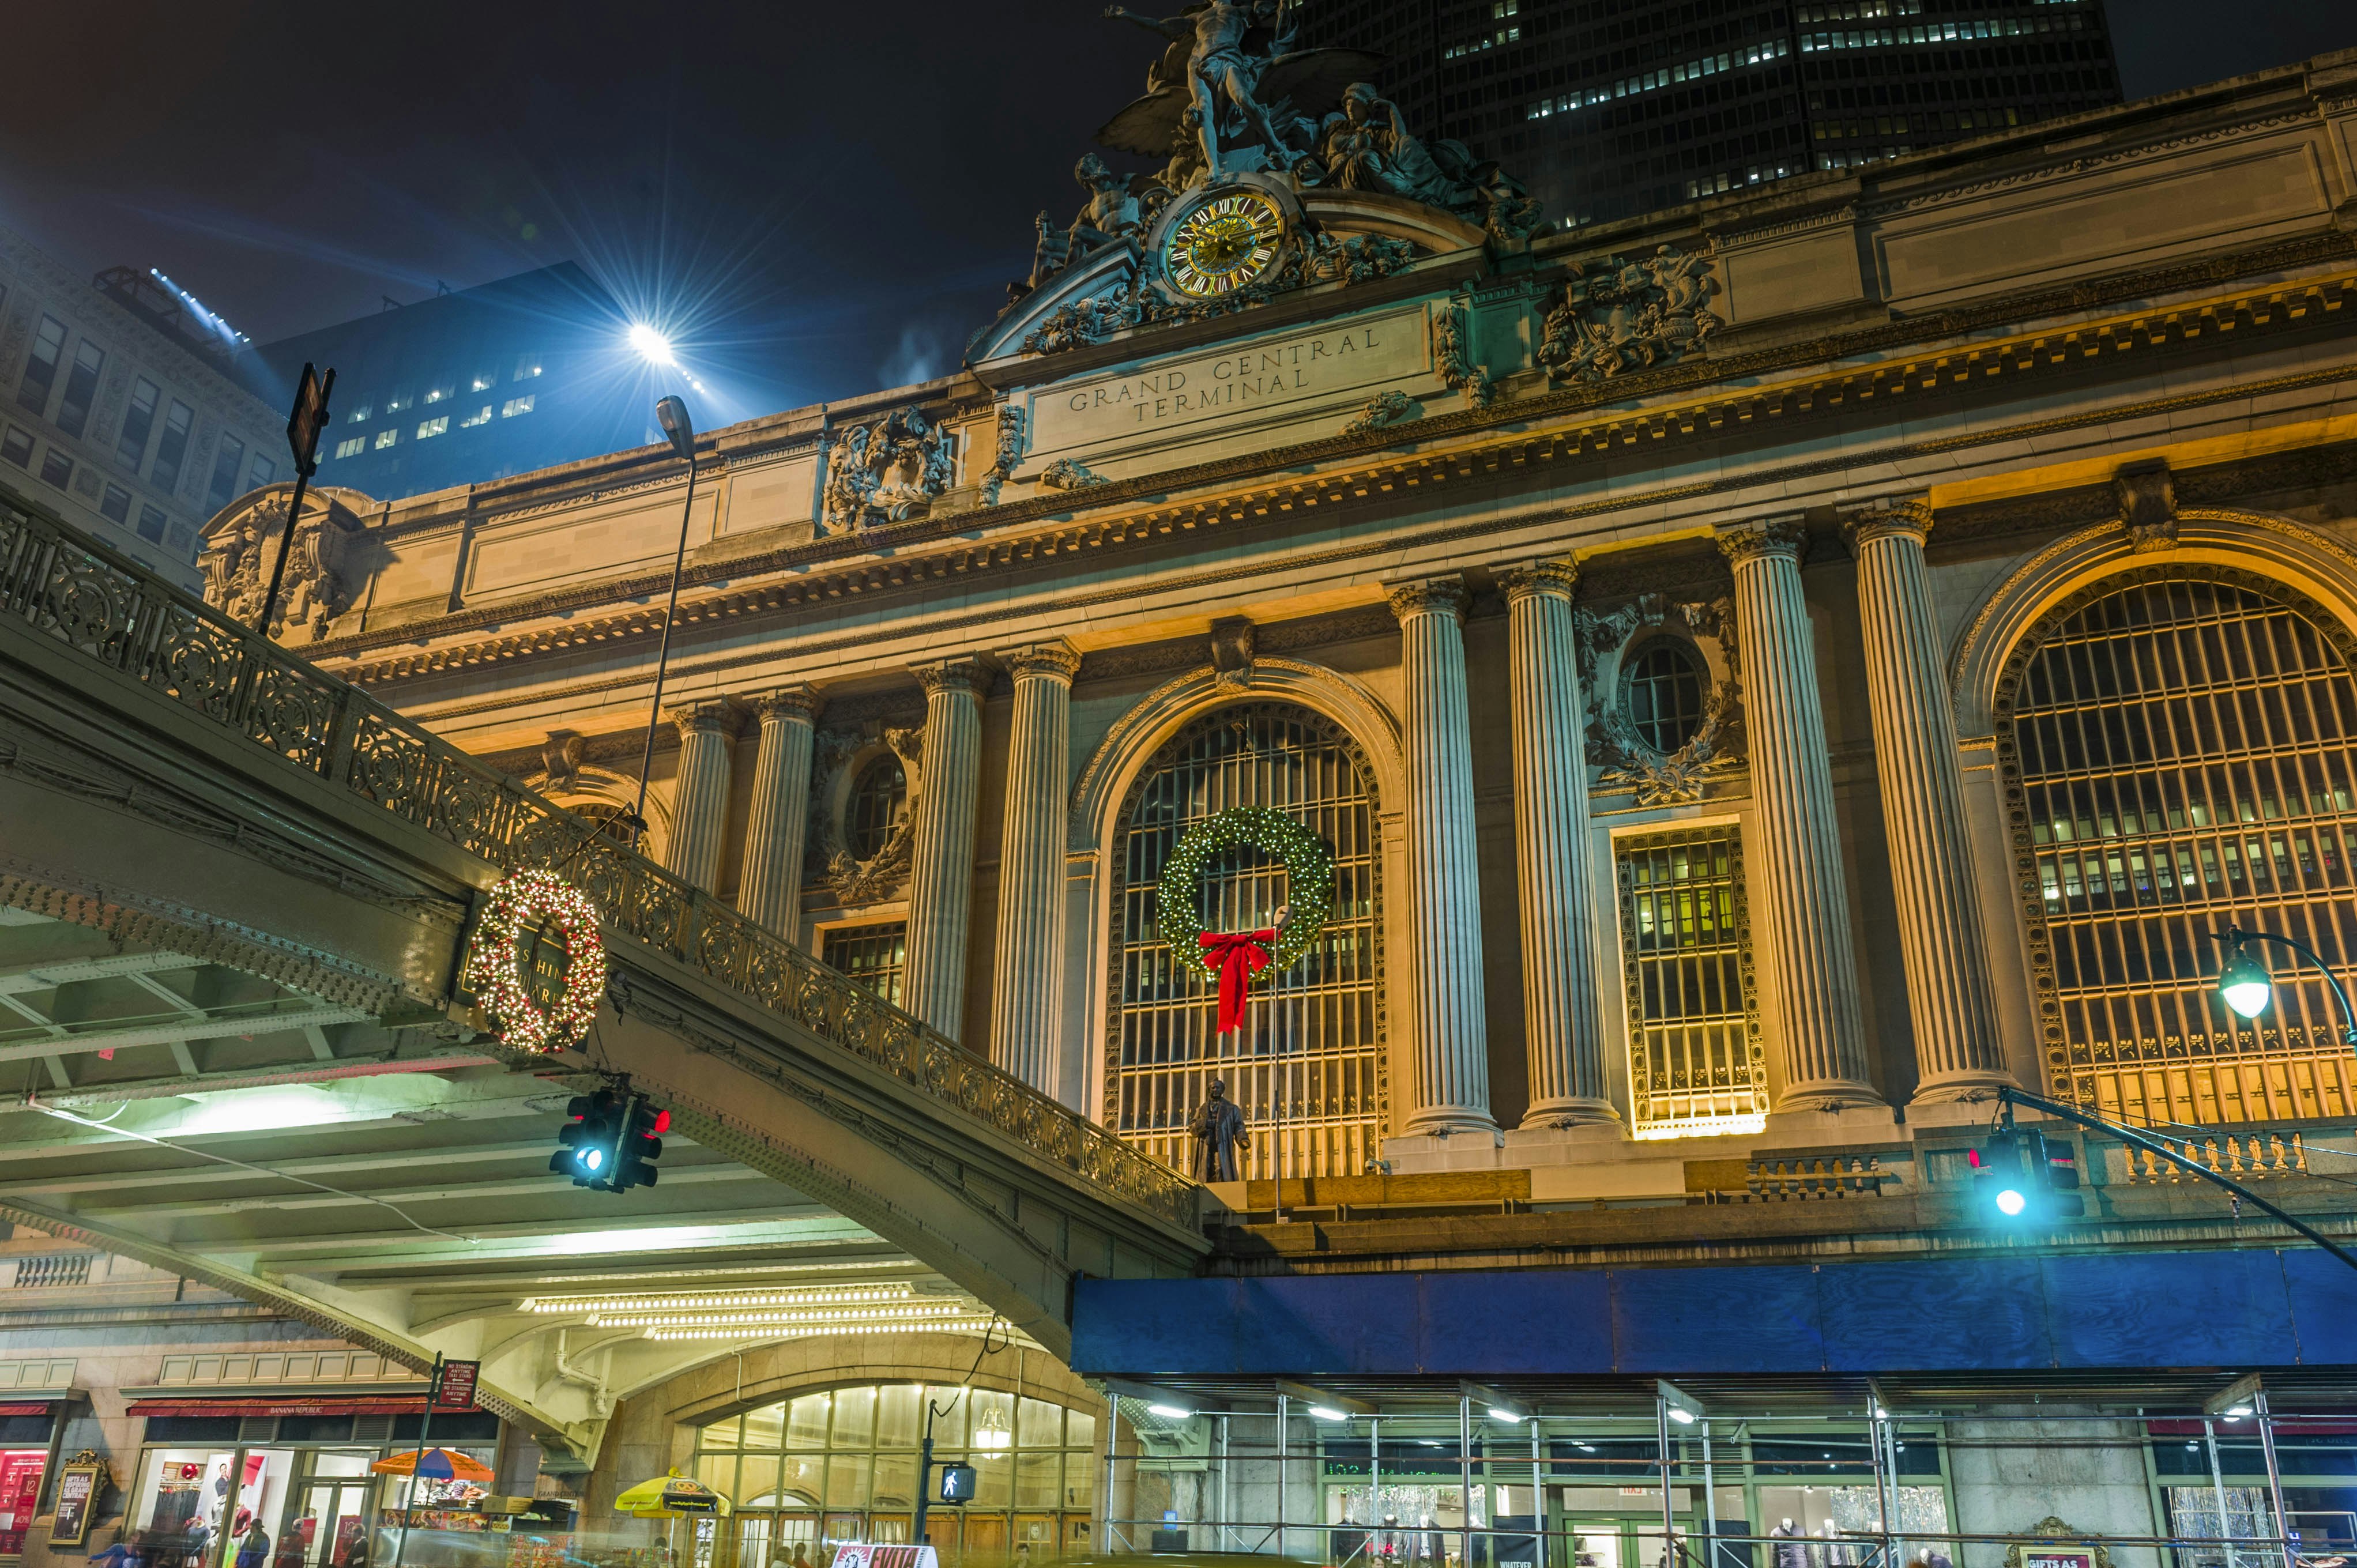 The facade of Grand Central Terminal adorned with Christmas wreaths